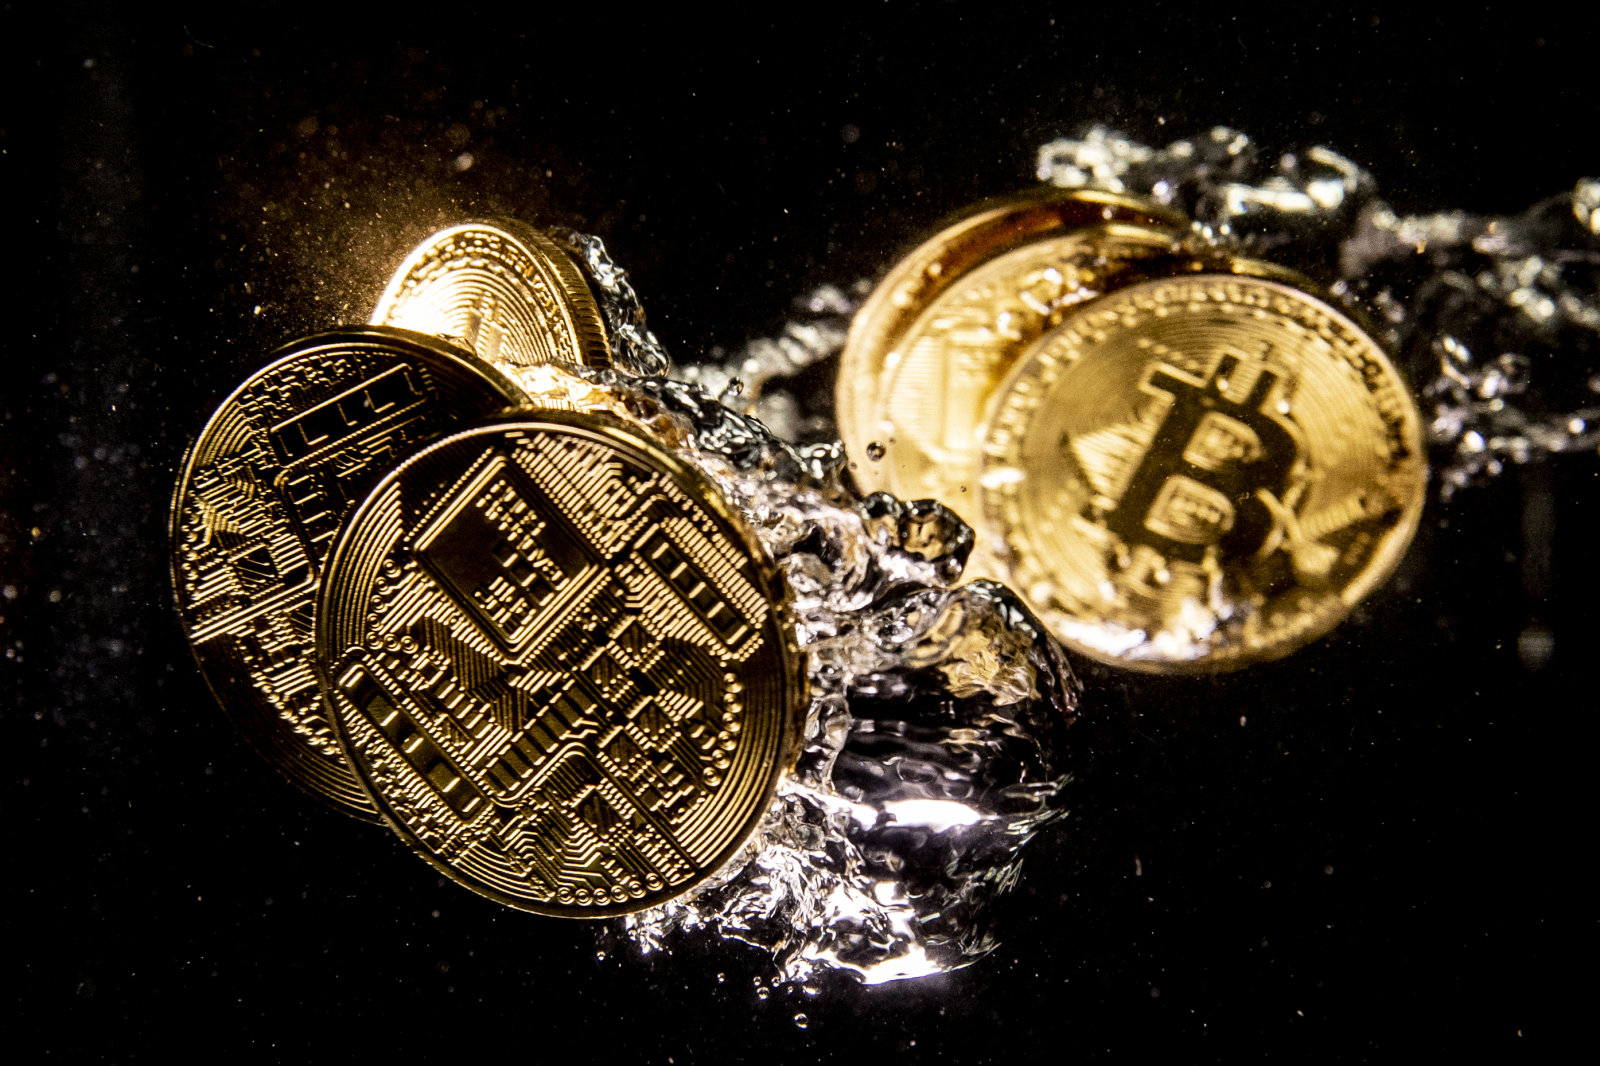 LONDON, ENGLAND - AUGUST 15: In this photo illustration a visual representation of the digital currency Bitcoin sinks into water on August 15, 2018 in London, England. Most digital currencies including Bitcoin, (BTC) Ethereum, (ETH) Ripple (XRP) and Stella (XLM) have seen a dramatic fall in their prices throughout 2018 amid a 'mass sell-off'. In December 2017 the price of BTC hit $20,000 USD but has since fallen to around $6000 USD.   (Photo Illustration by Dan Kitwood/Getty Images)